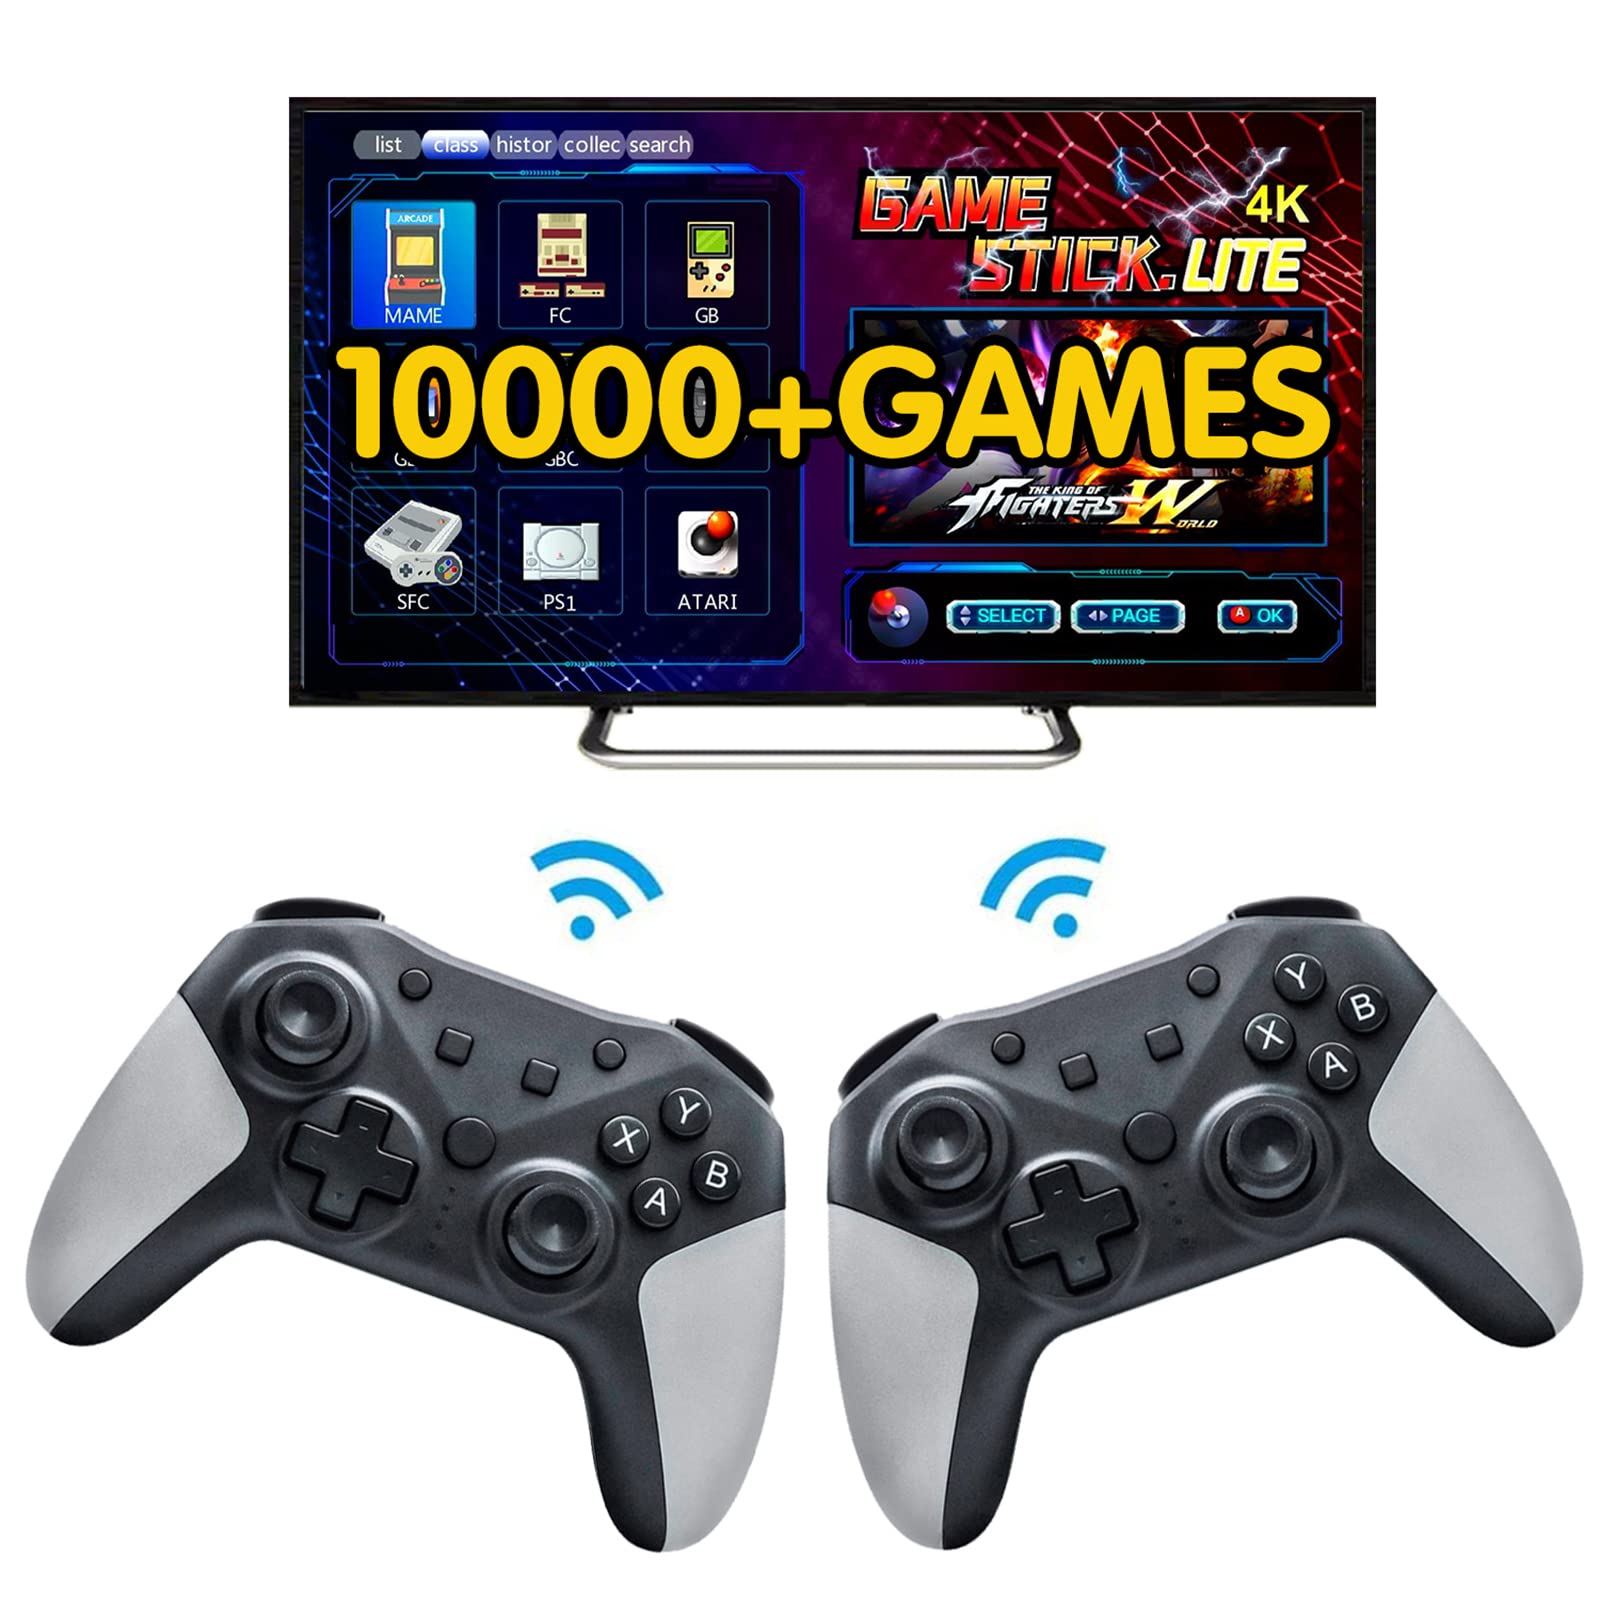 ScienSta Wireless Retro Game Console, Plug and Play Video Game Stick Built in 10000+ Games, 4K High Definition HDMI Output for TV with Dual 2.4G Wireless Controllers,9 Classic Emulators